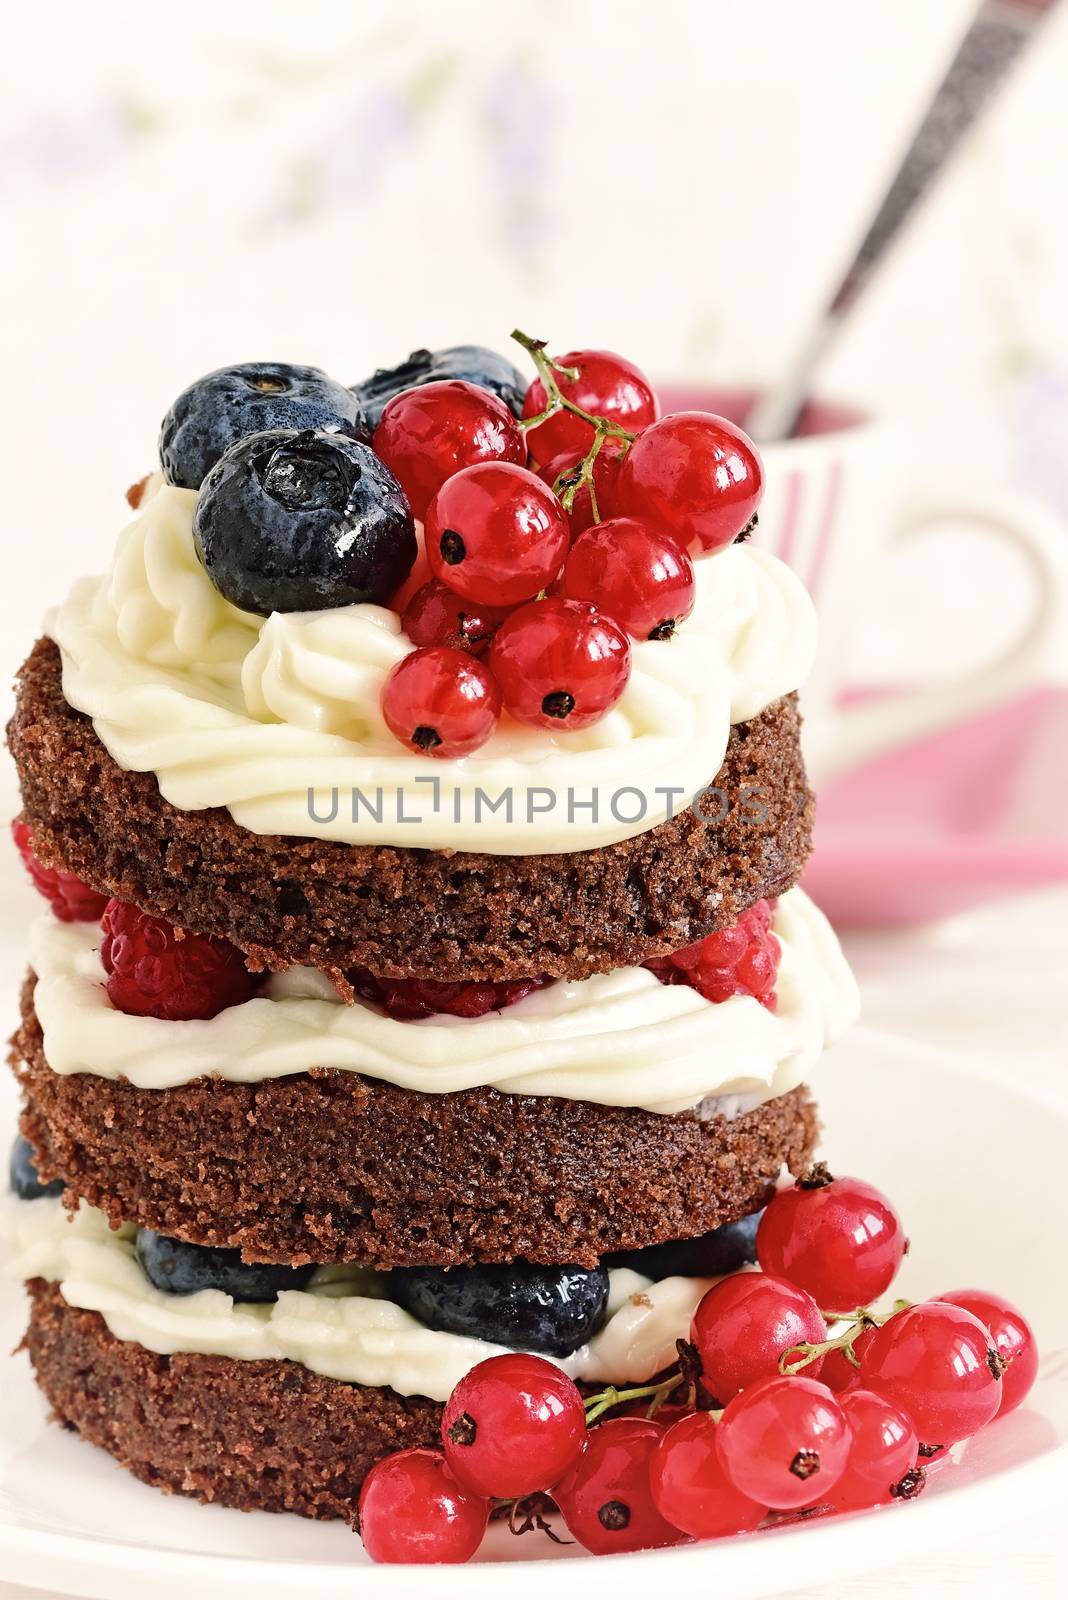 Homemade cake with berries by Visual-Content